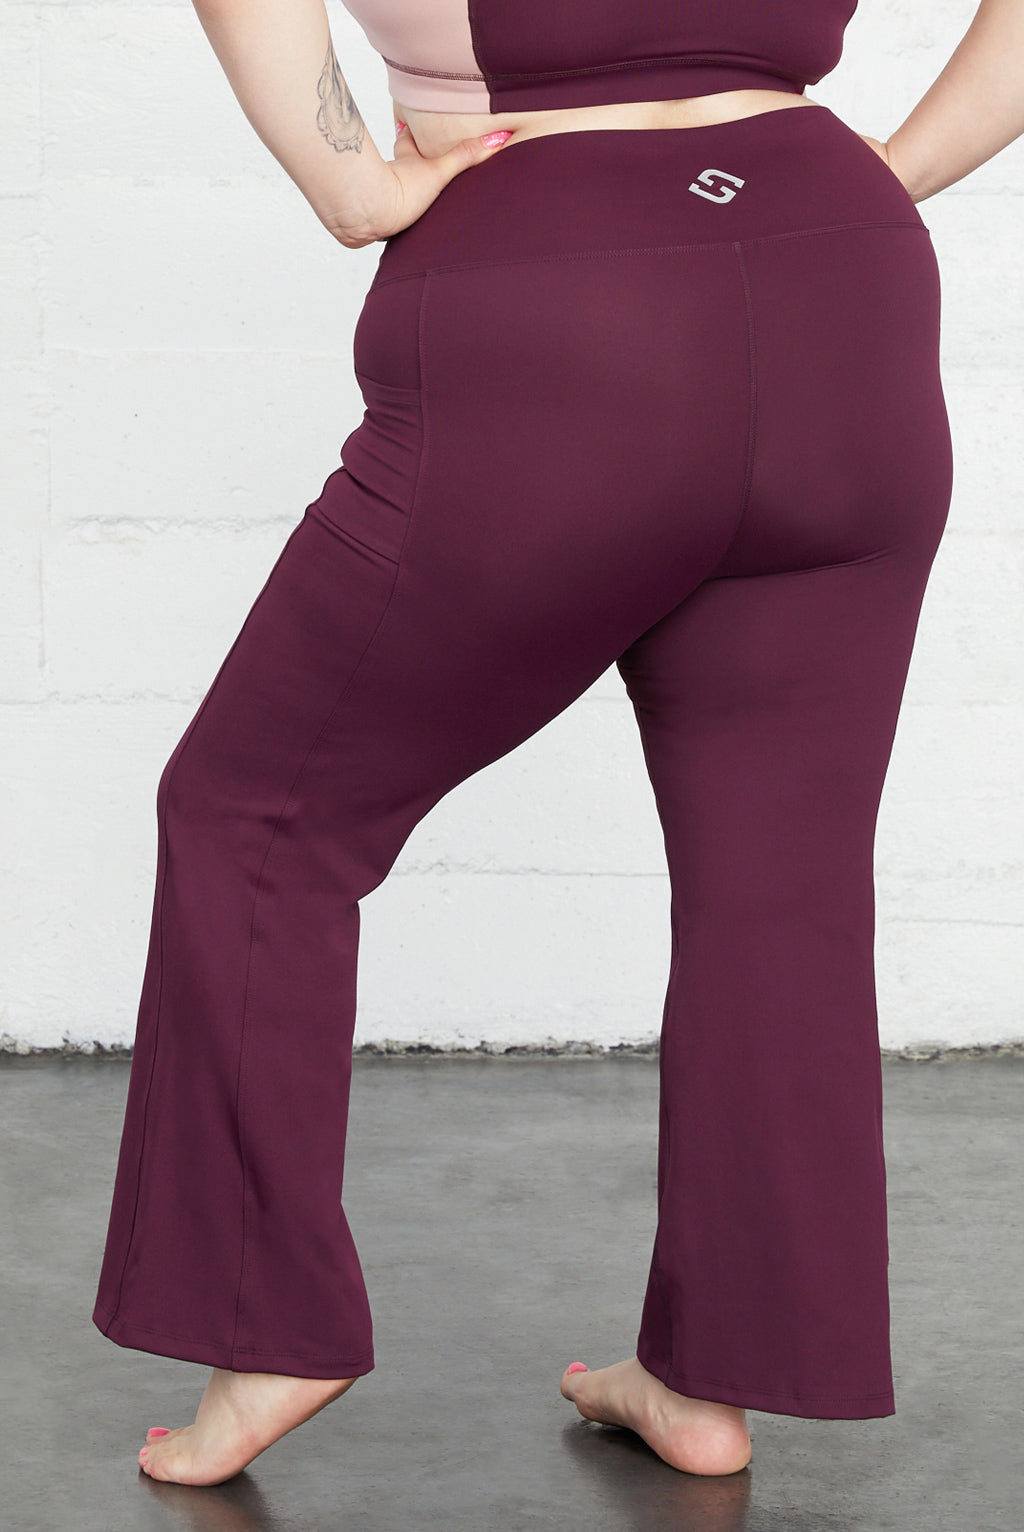 Buy Victoria's Secret PINK High Waist Ultimate Flare Legging from